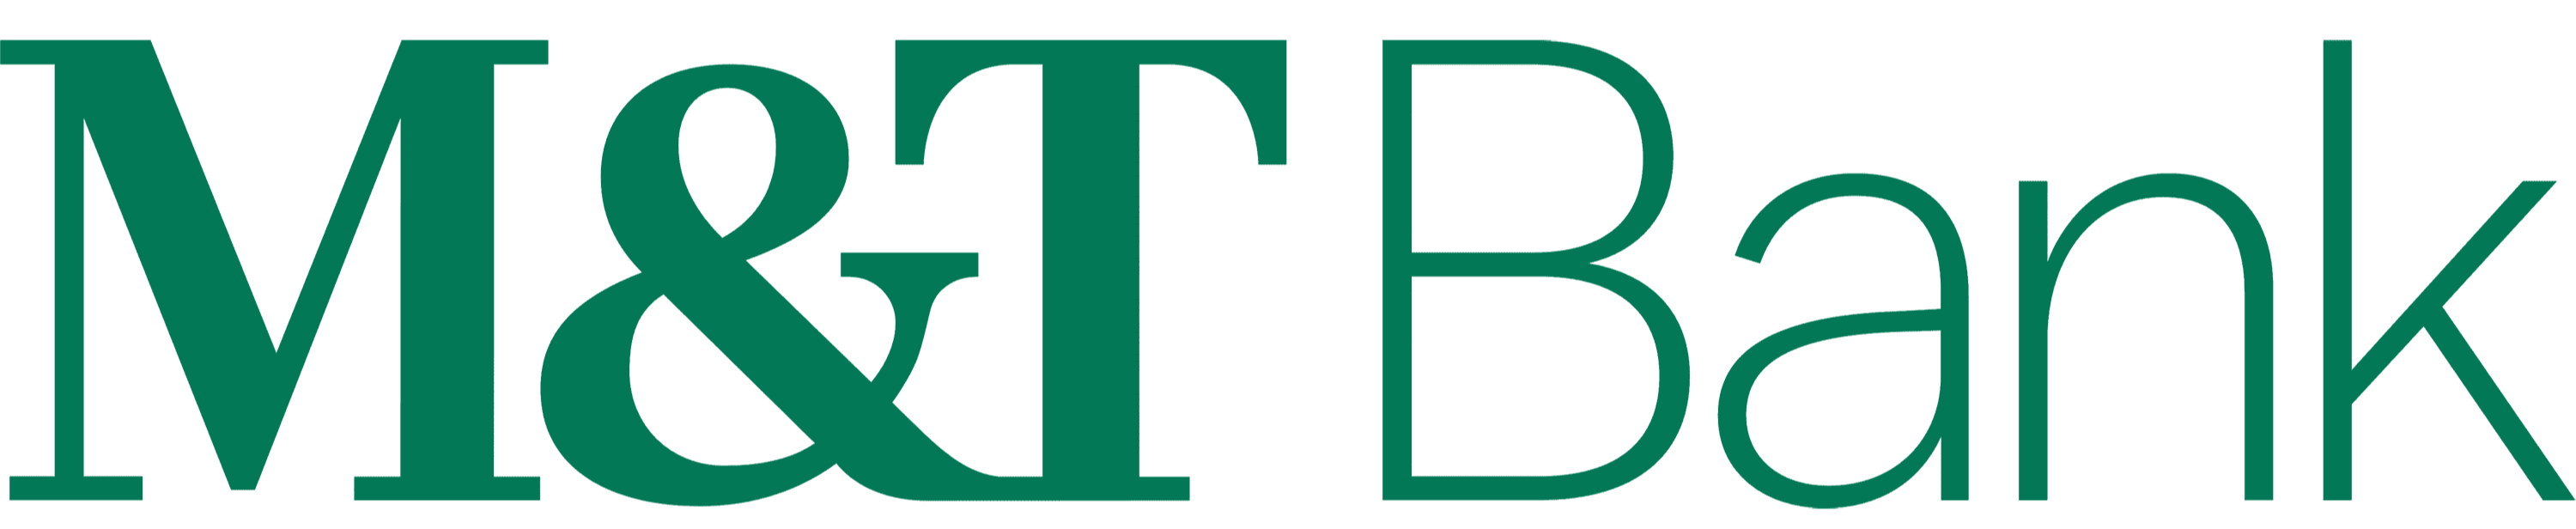 m-and-t bank logo